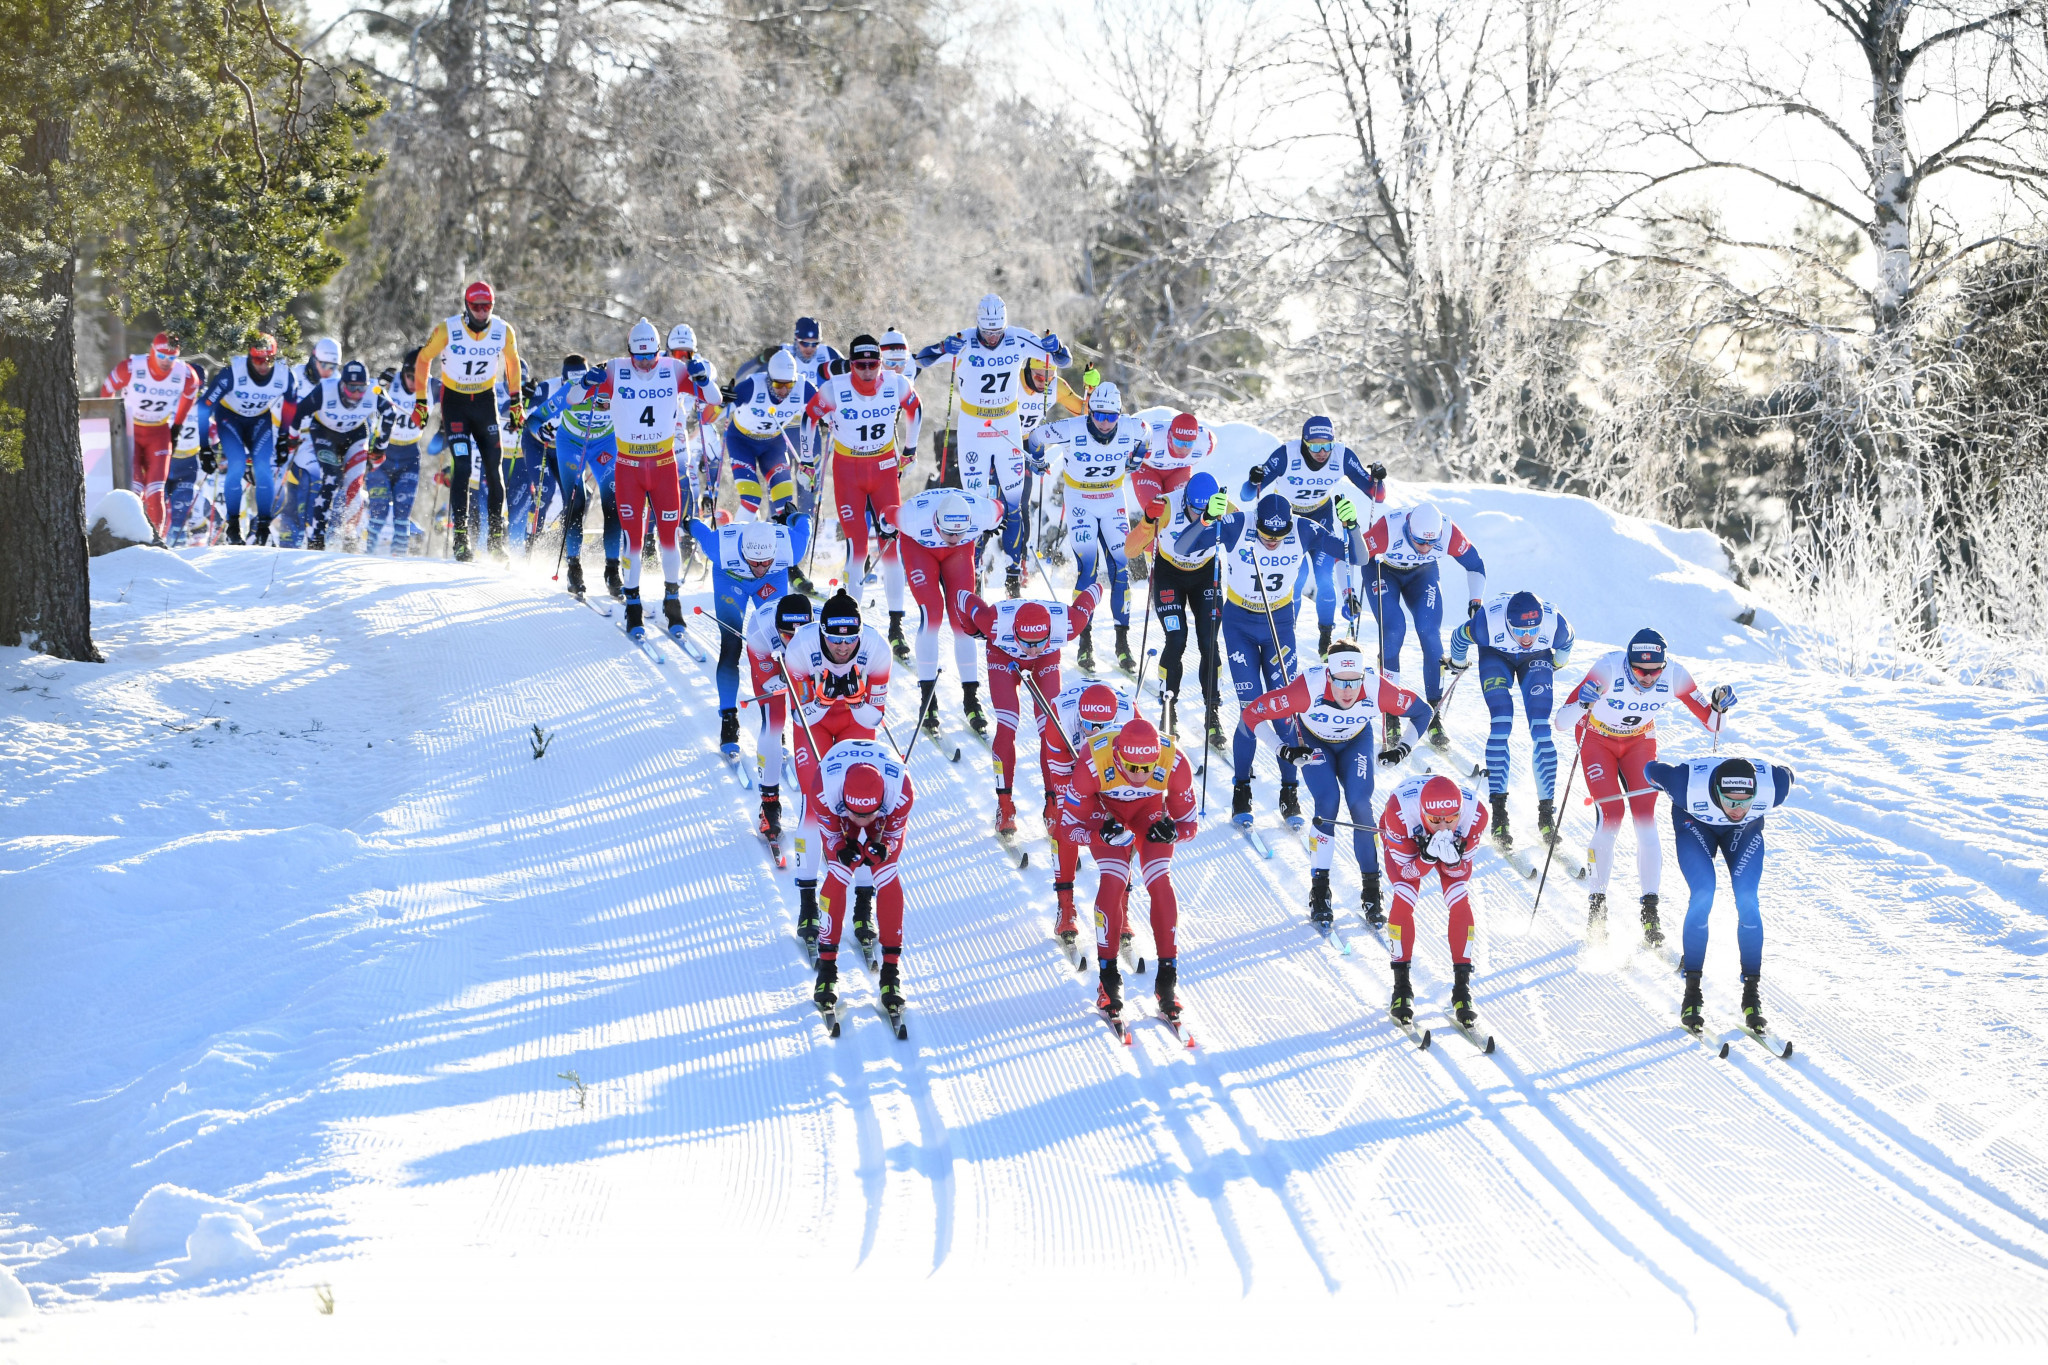 Engadin to host next FIS Cross-Country World Cup stage after Oslo’s withdrawal